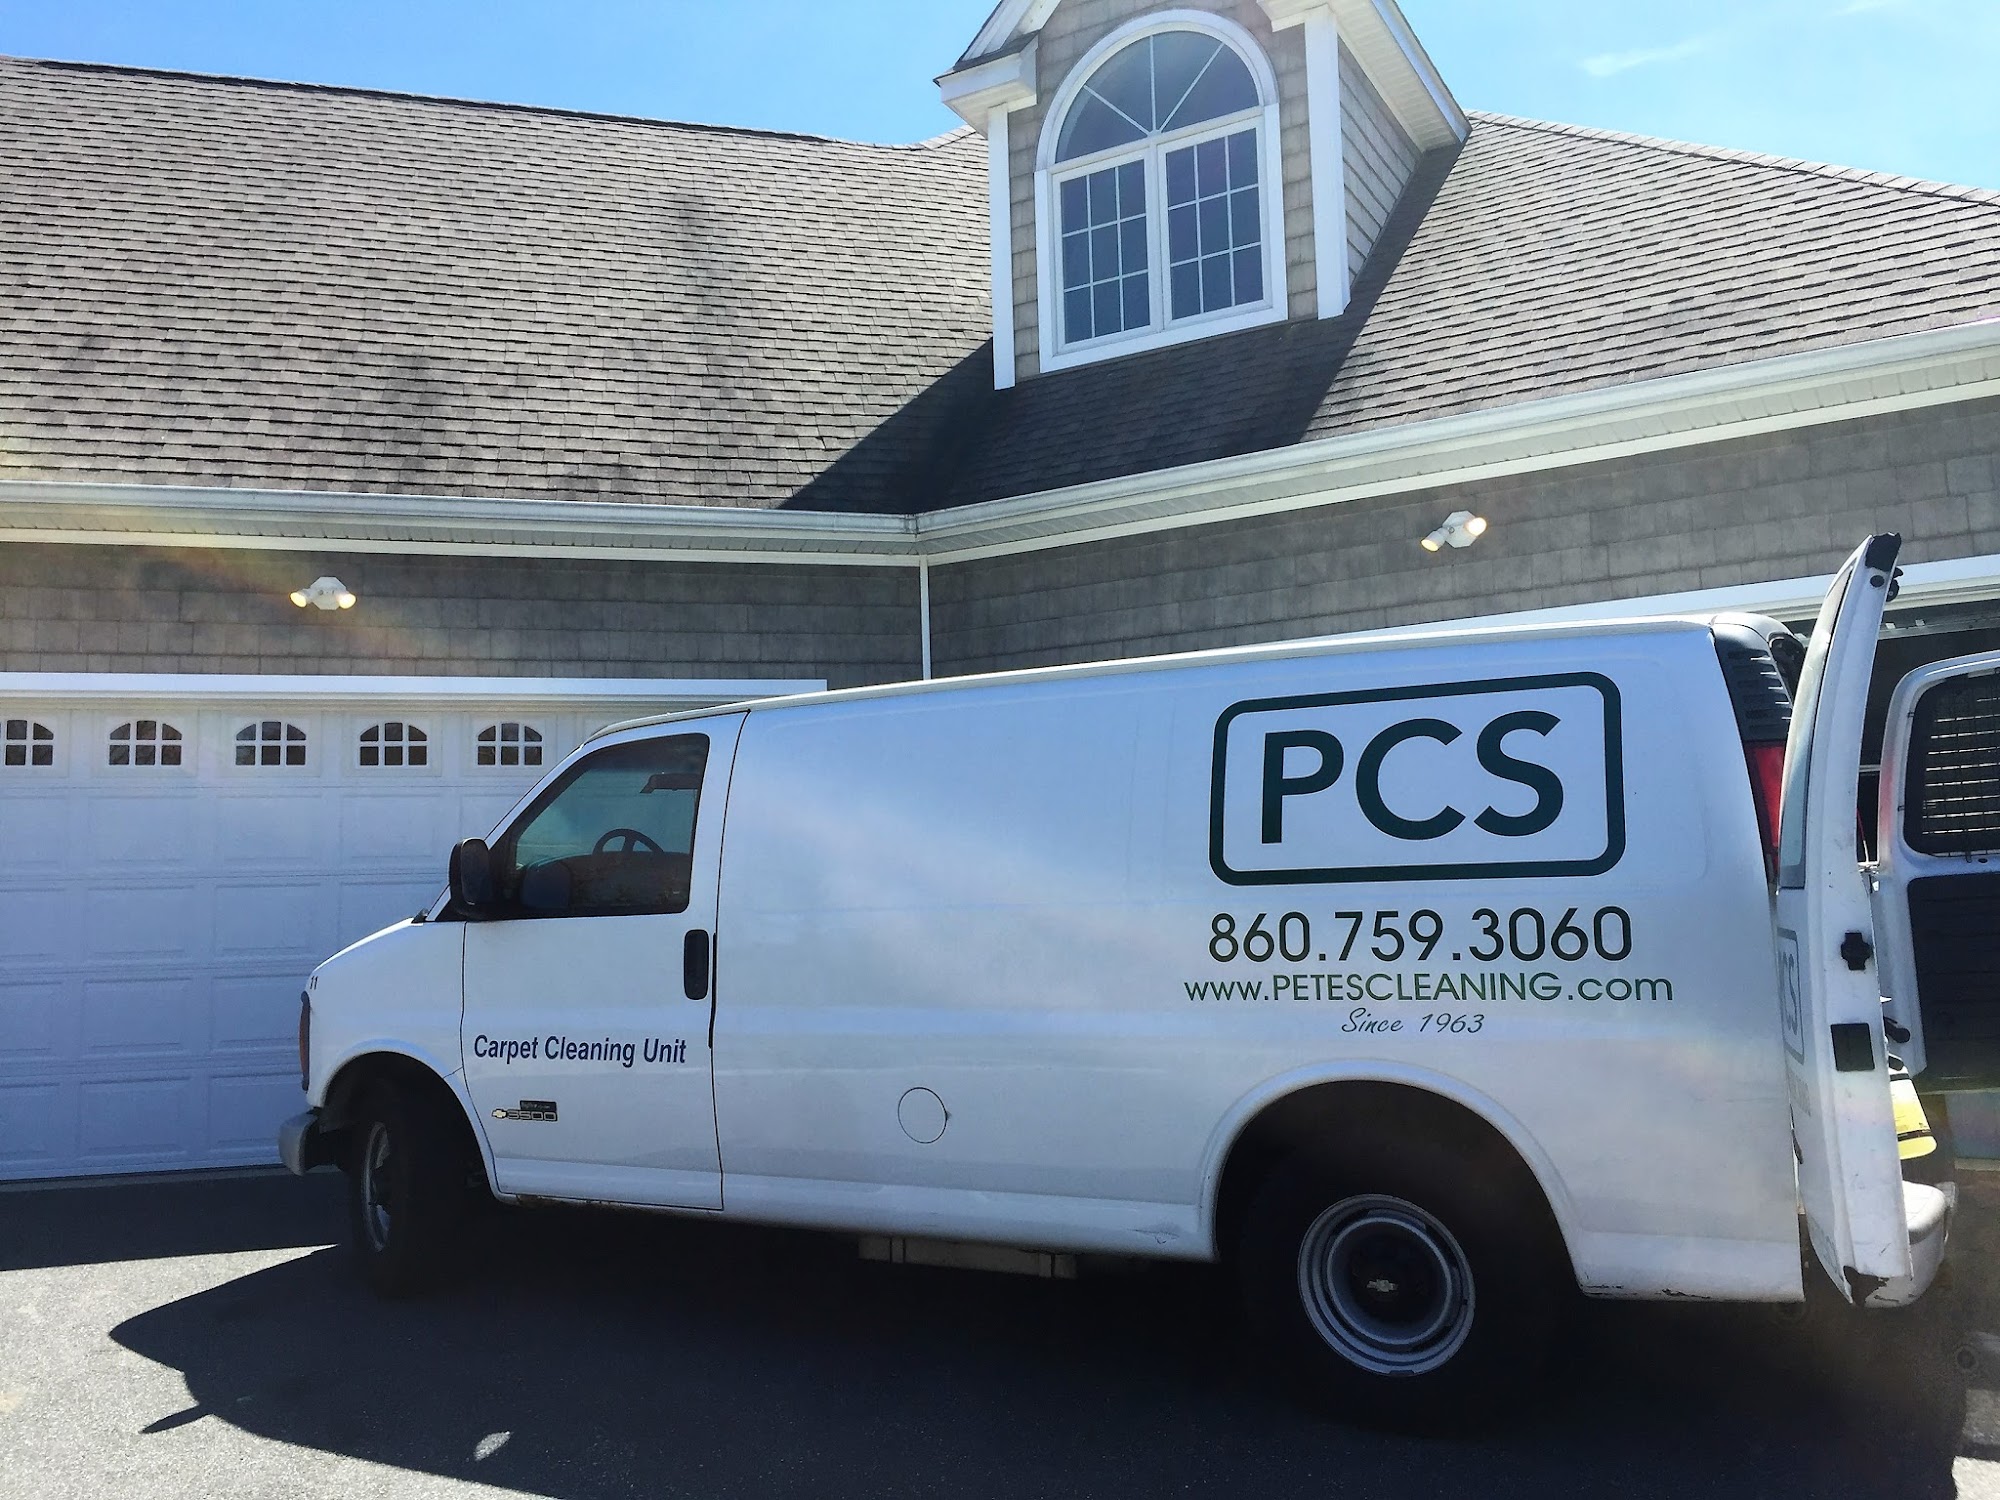 Pete's Cleaning, LLC